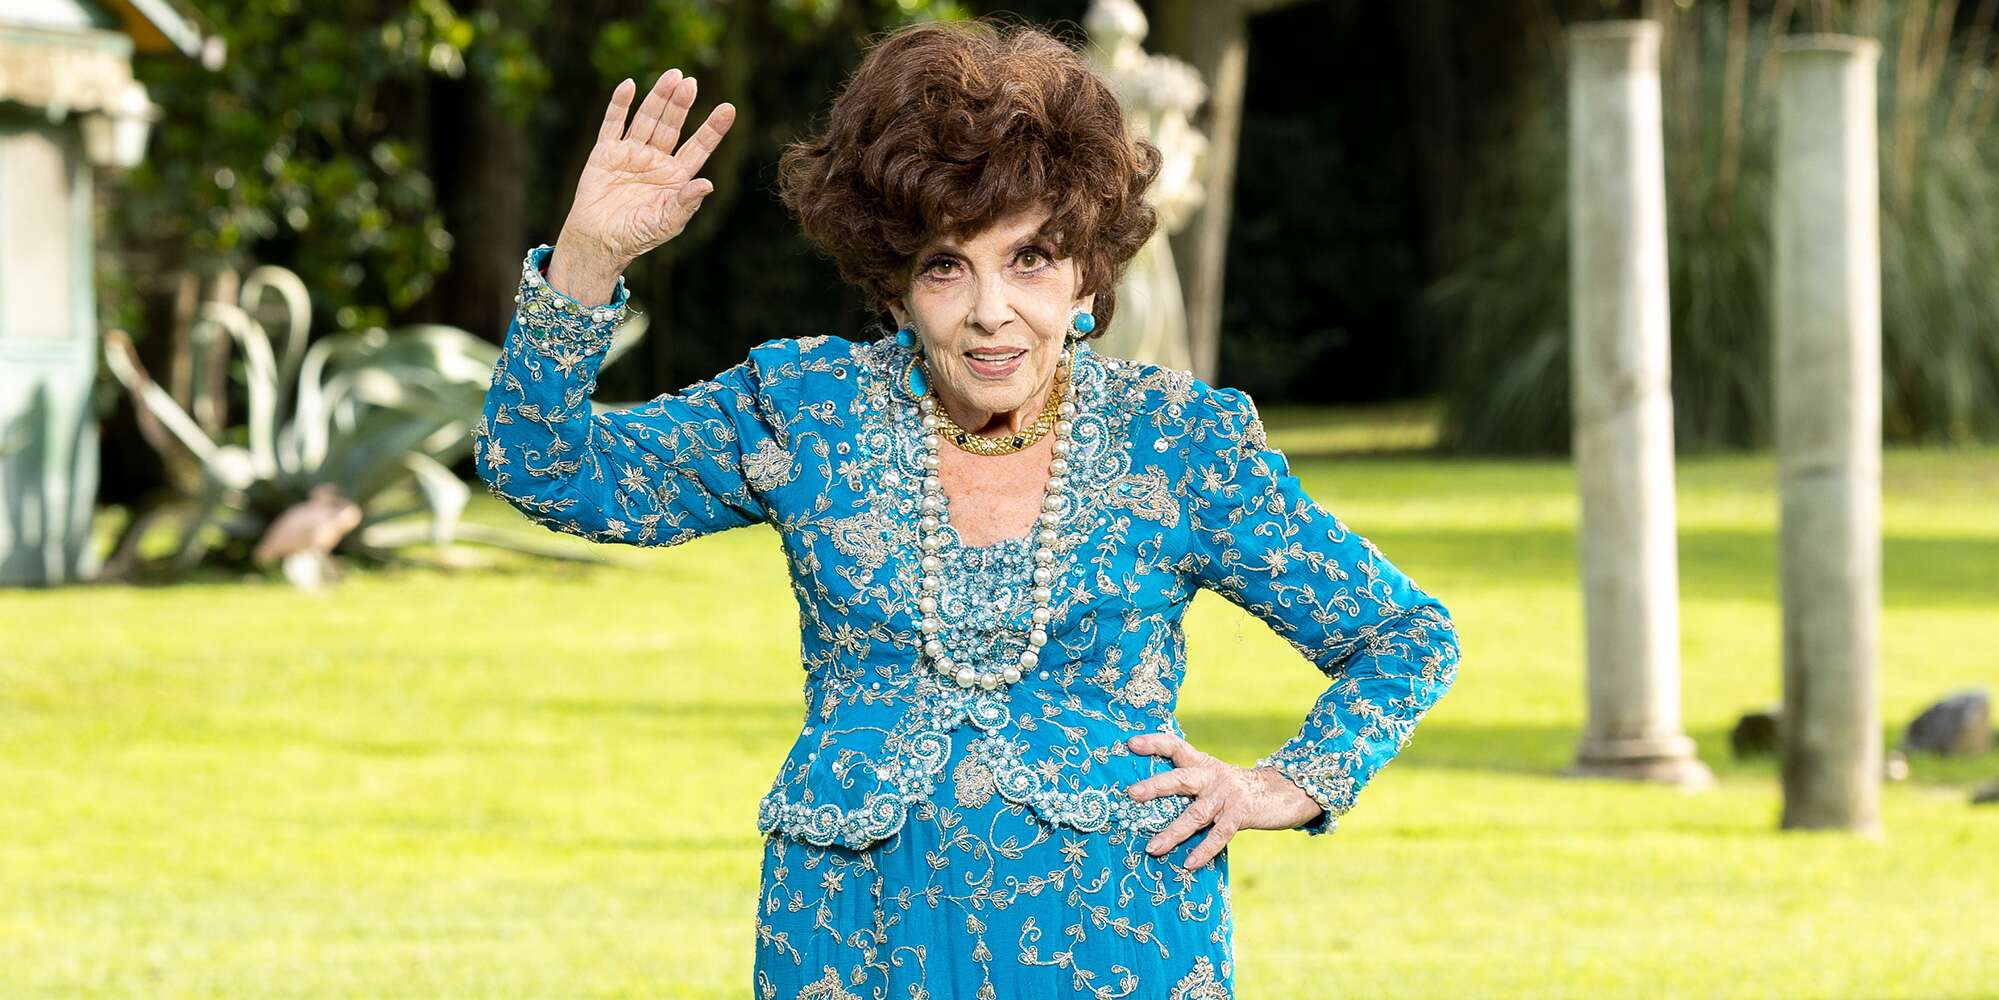 Gina Lollobrigida, 95-year-old star of Hollywood's Golden Age, is planning a run for the Italian Senate